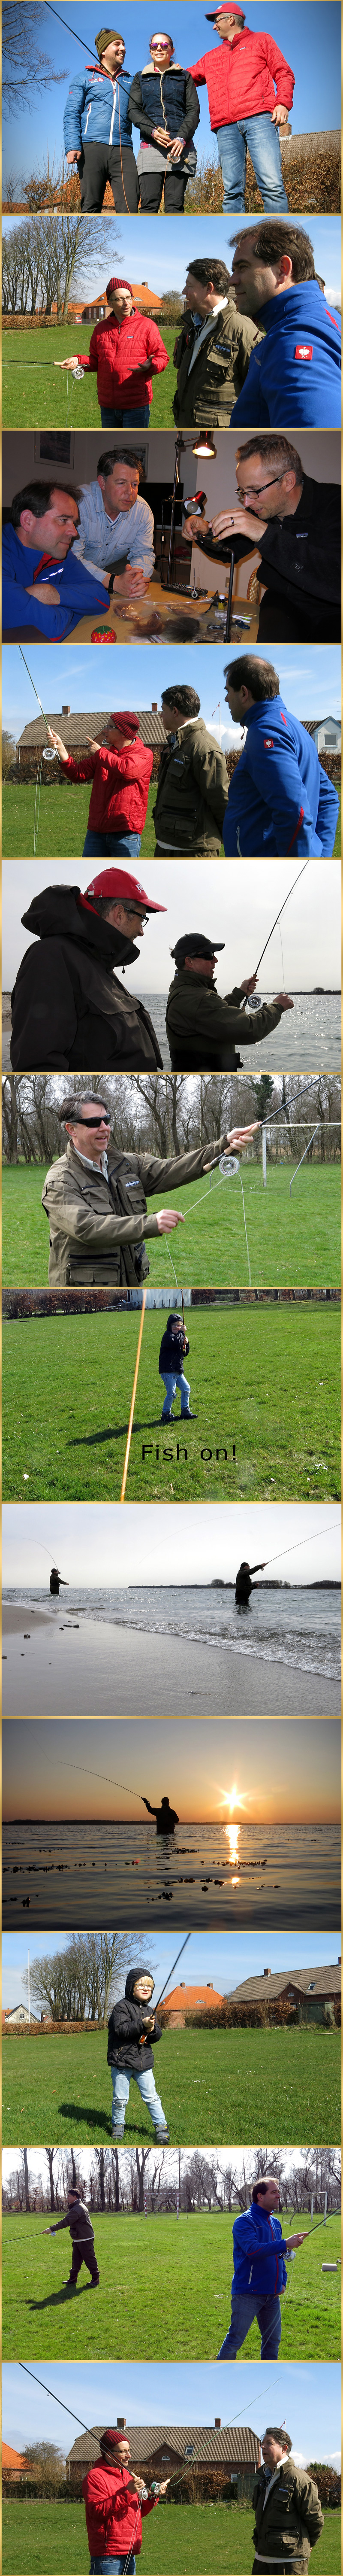 fly casting tuition